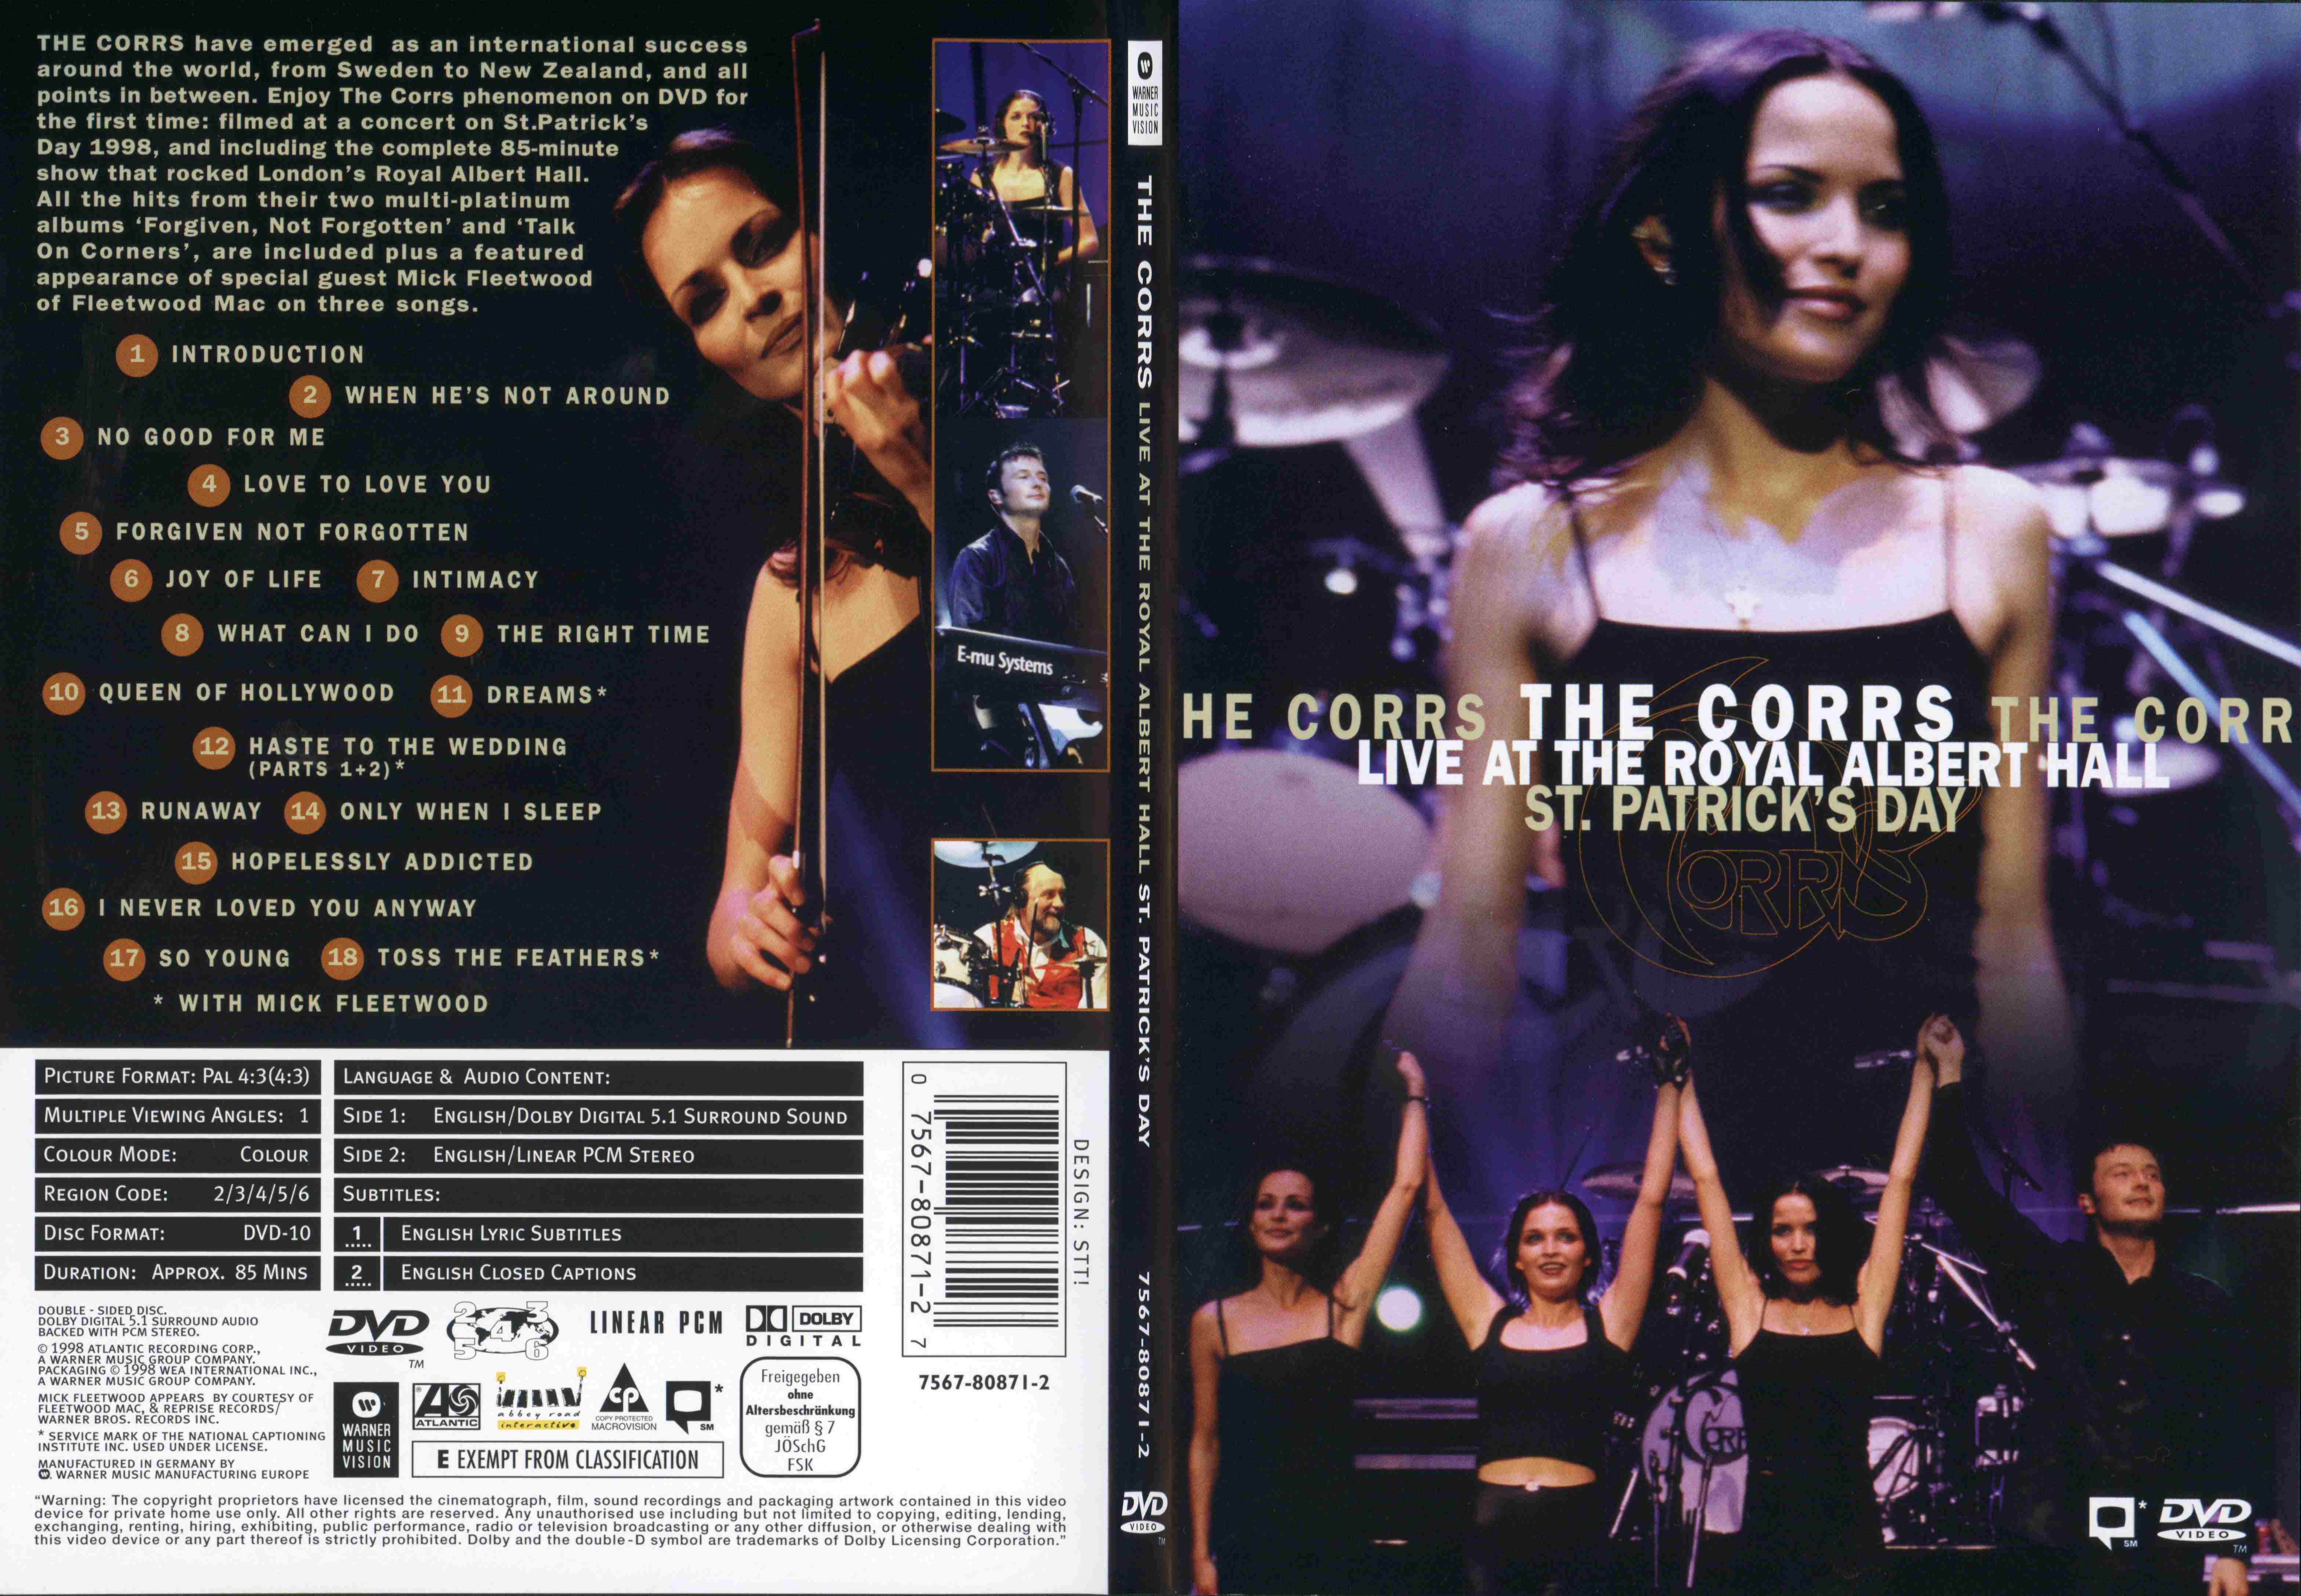 Jaquette DVD The Corrs - Live at the Royal Albert Hall - SLIM